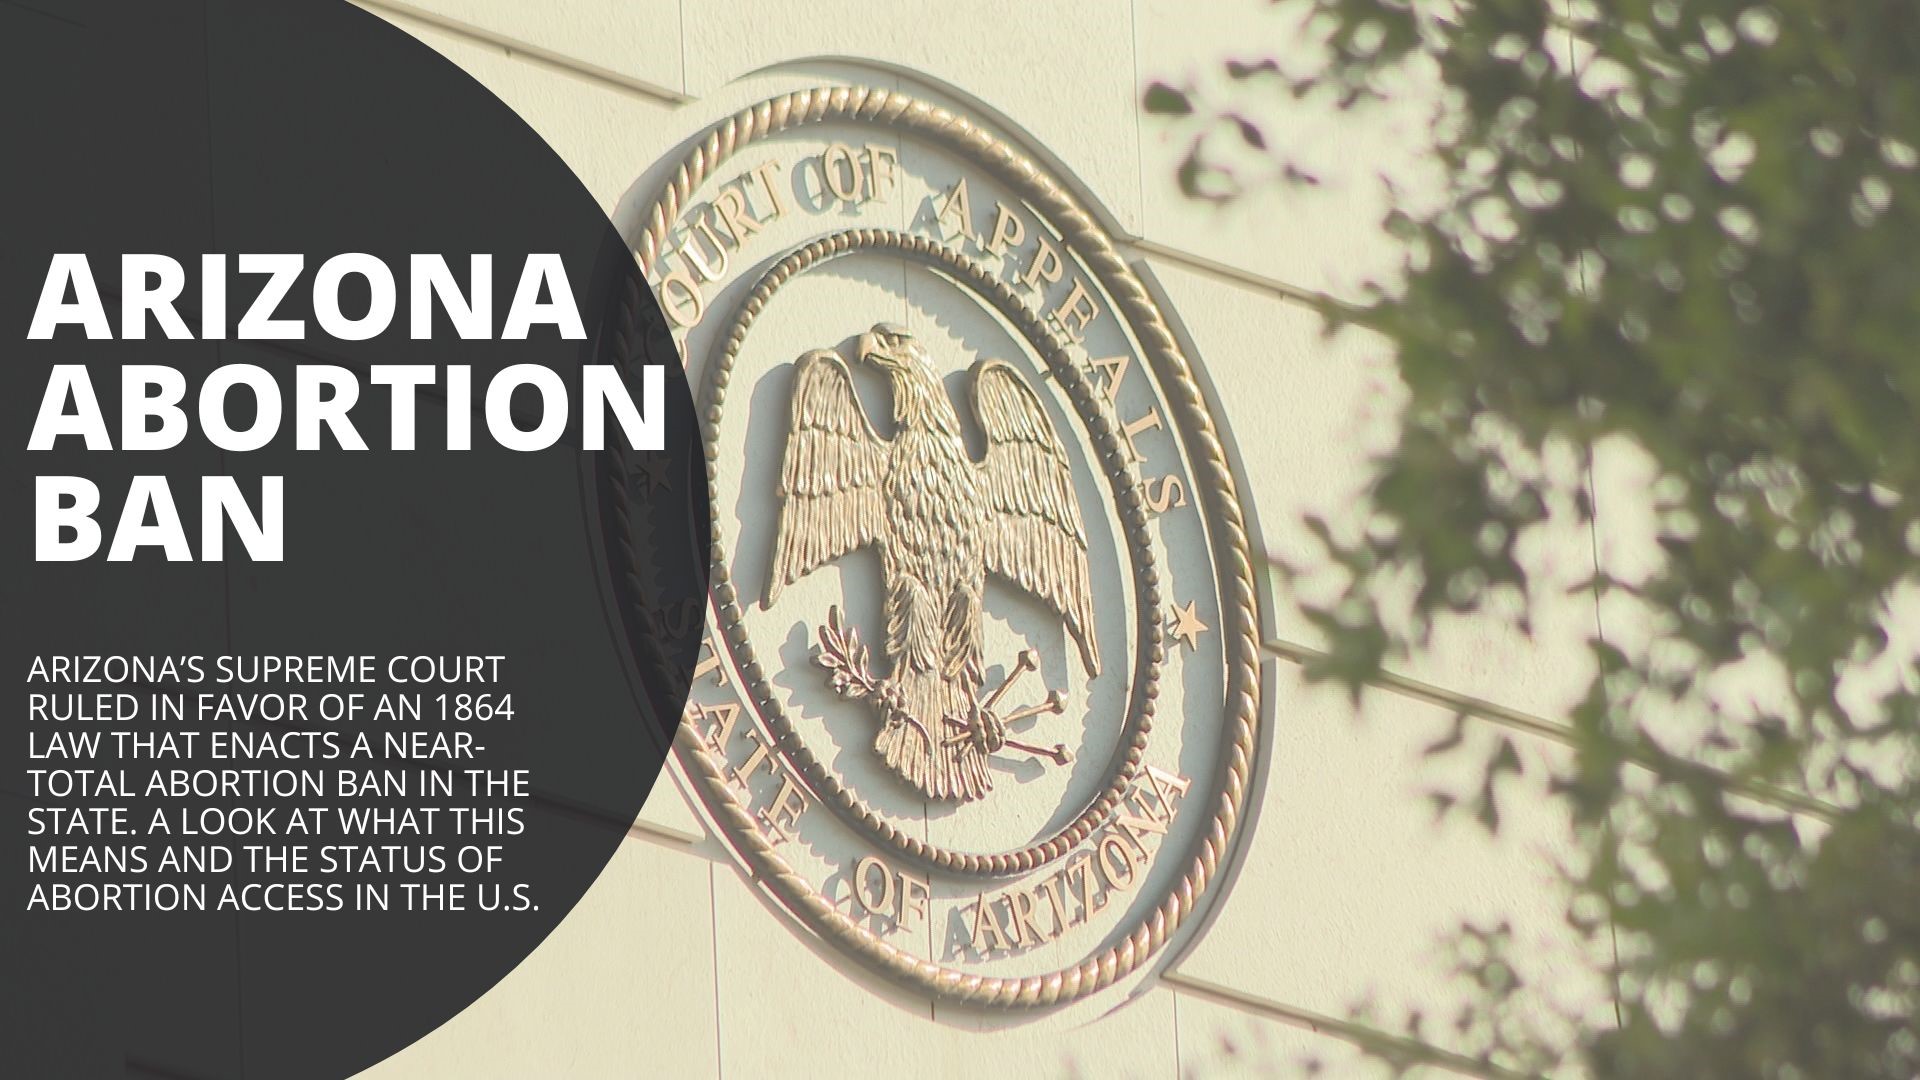 Arizona’s Supreme Court ruled in favor of an 1864 law that enacts a near-total abortion ban. A look at what this means and the status of abortion access.